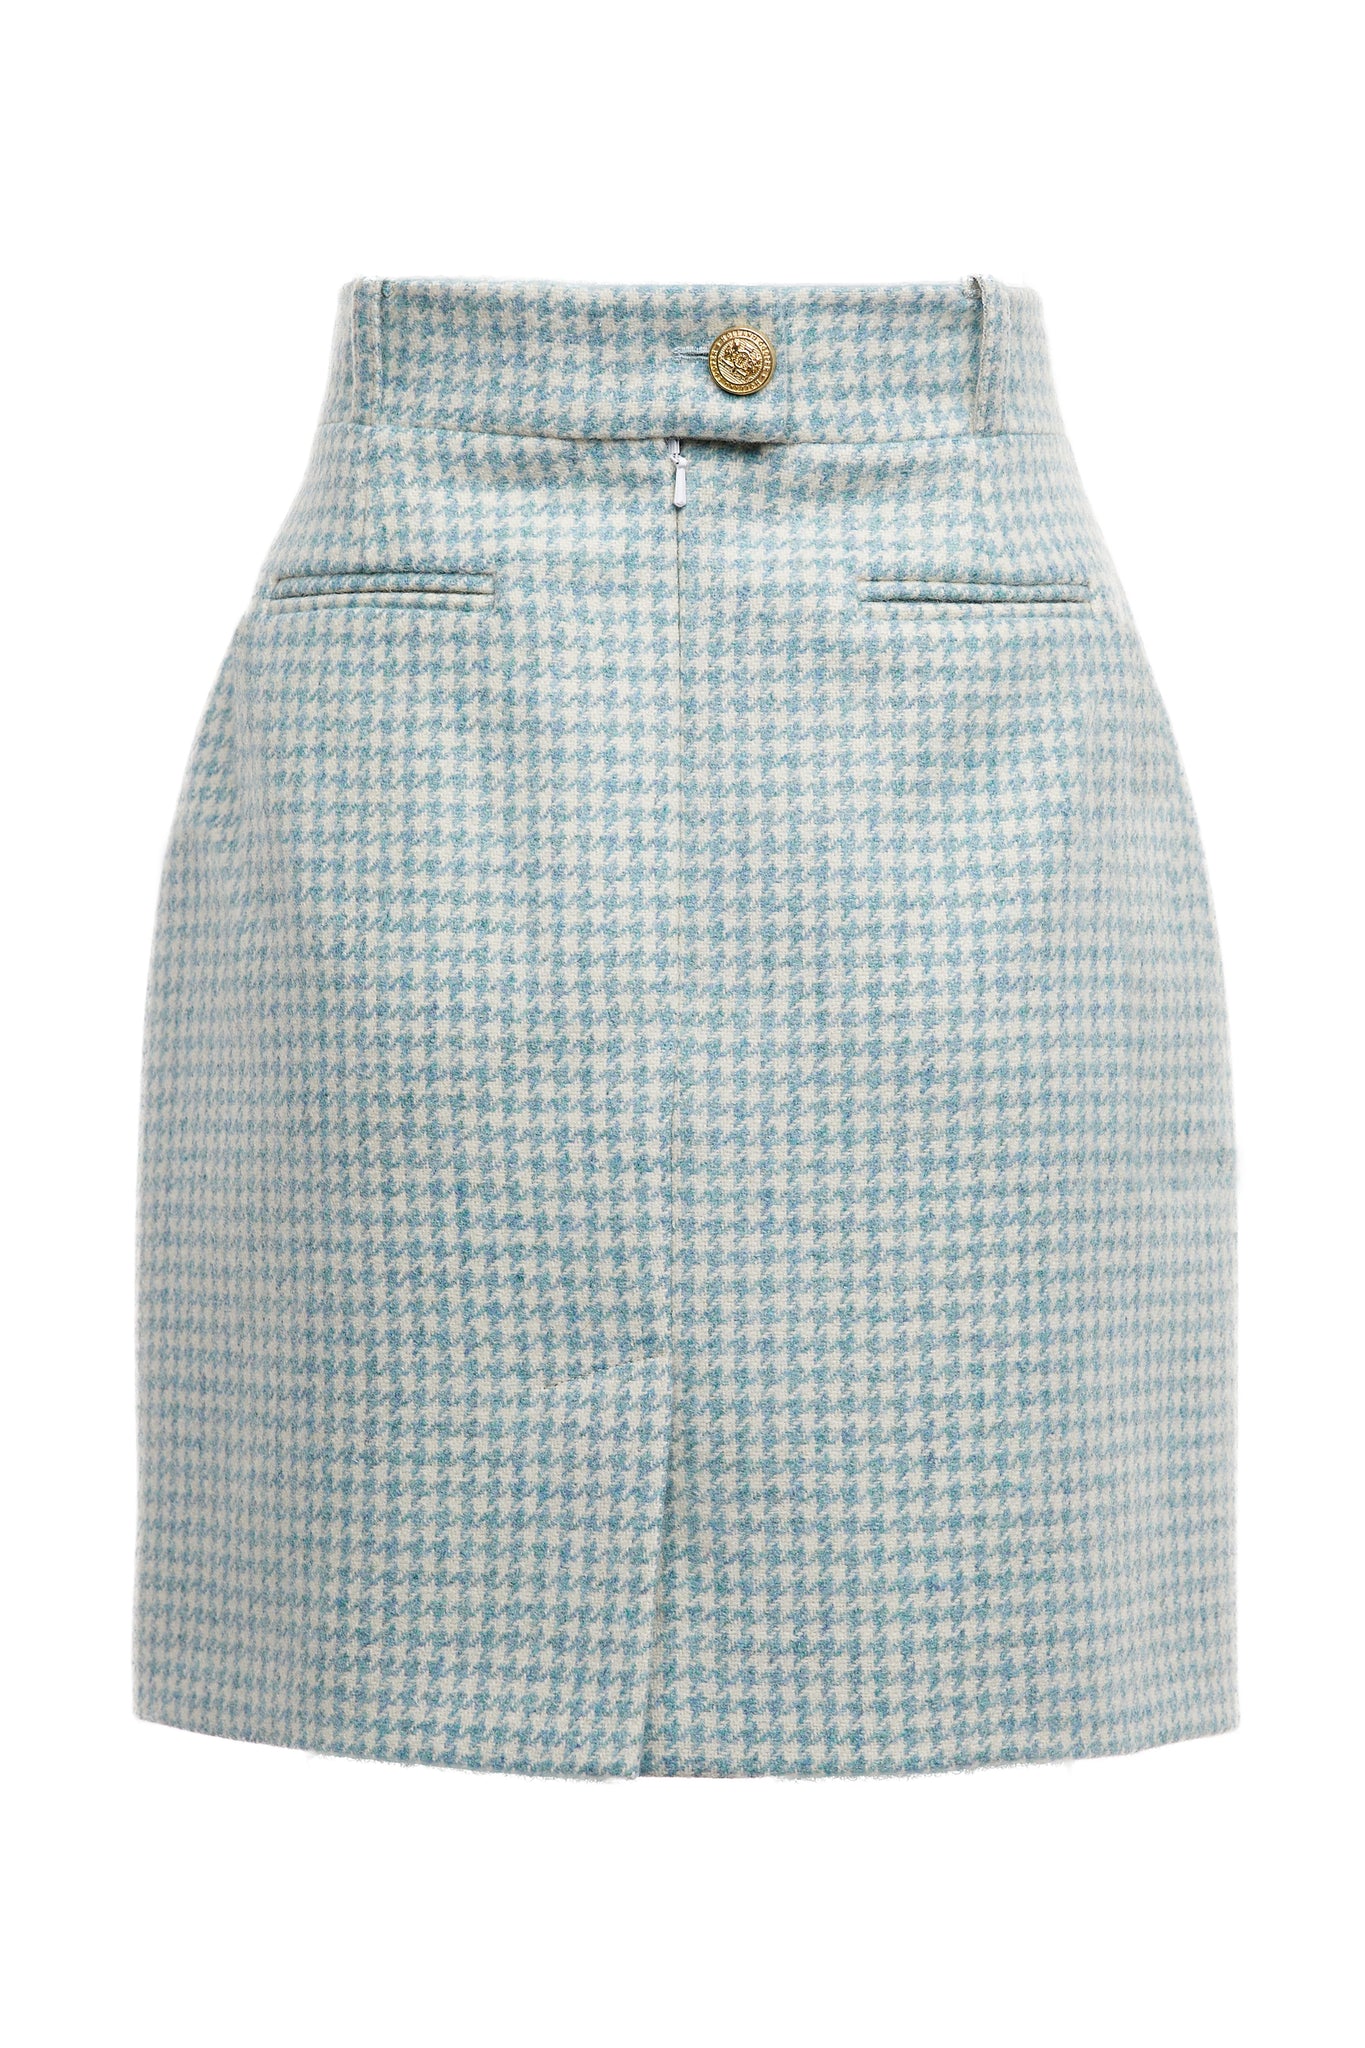 back of womens light blue and white houndstooth wool pencil mini skirt with concealed zip fastening on centre back and gold rivets down front